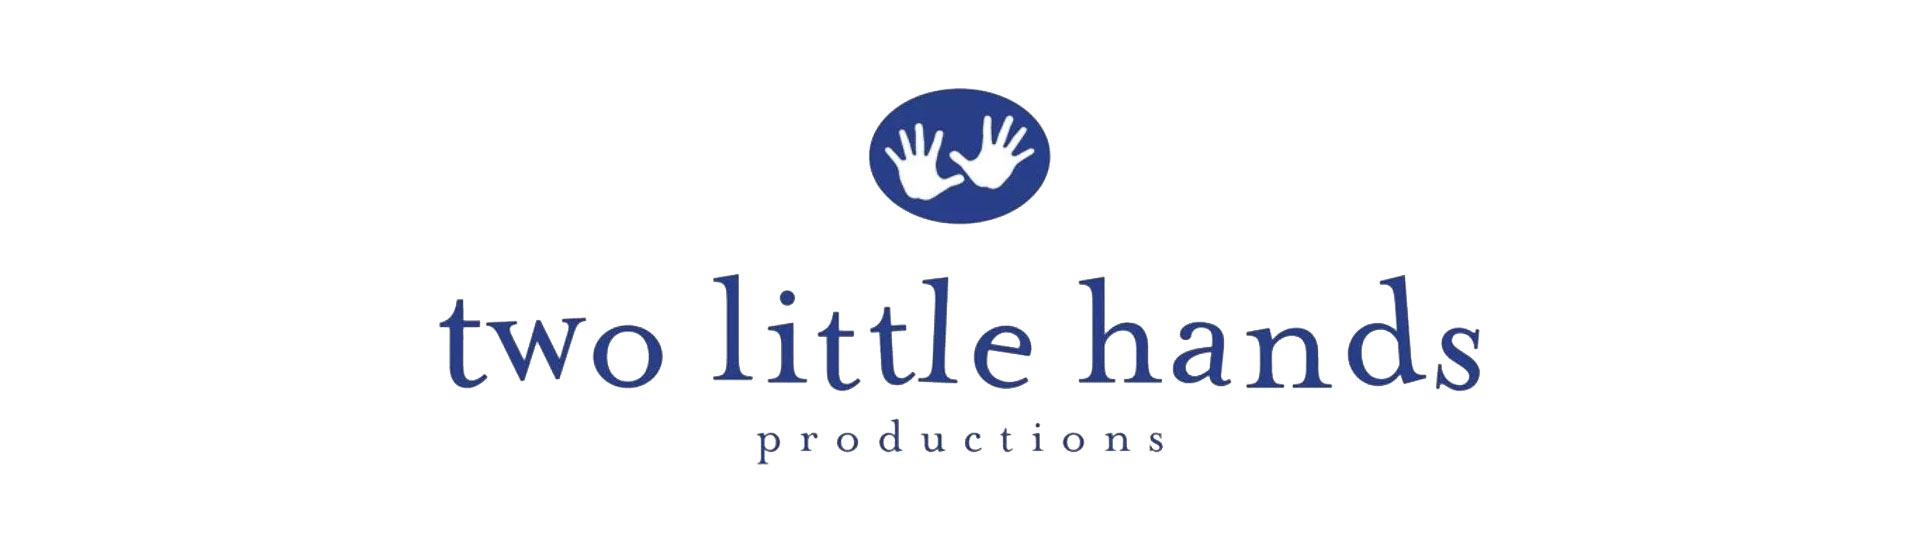 Image for Two Little Hands Productions